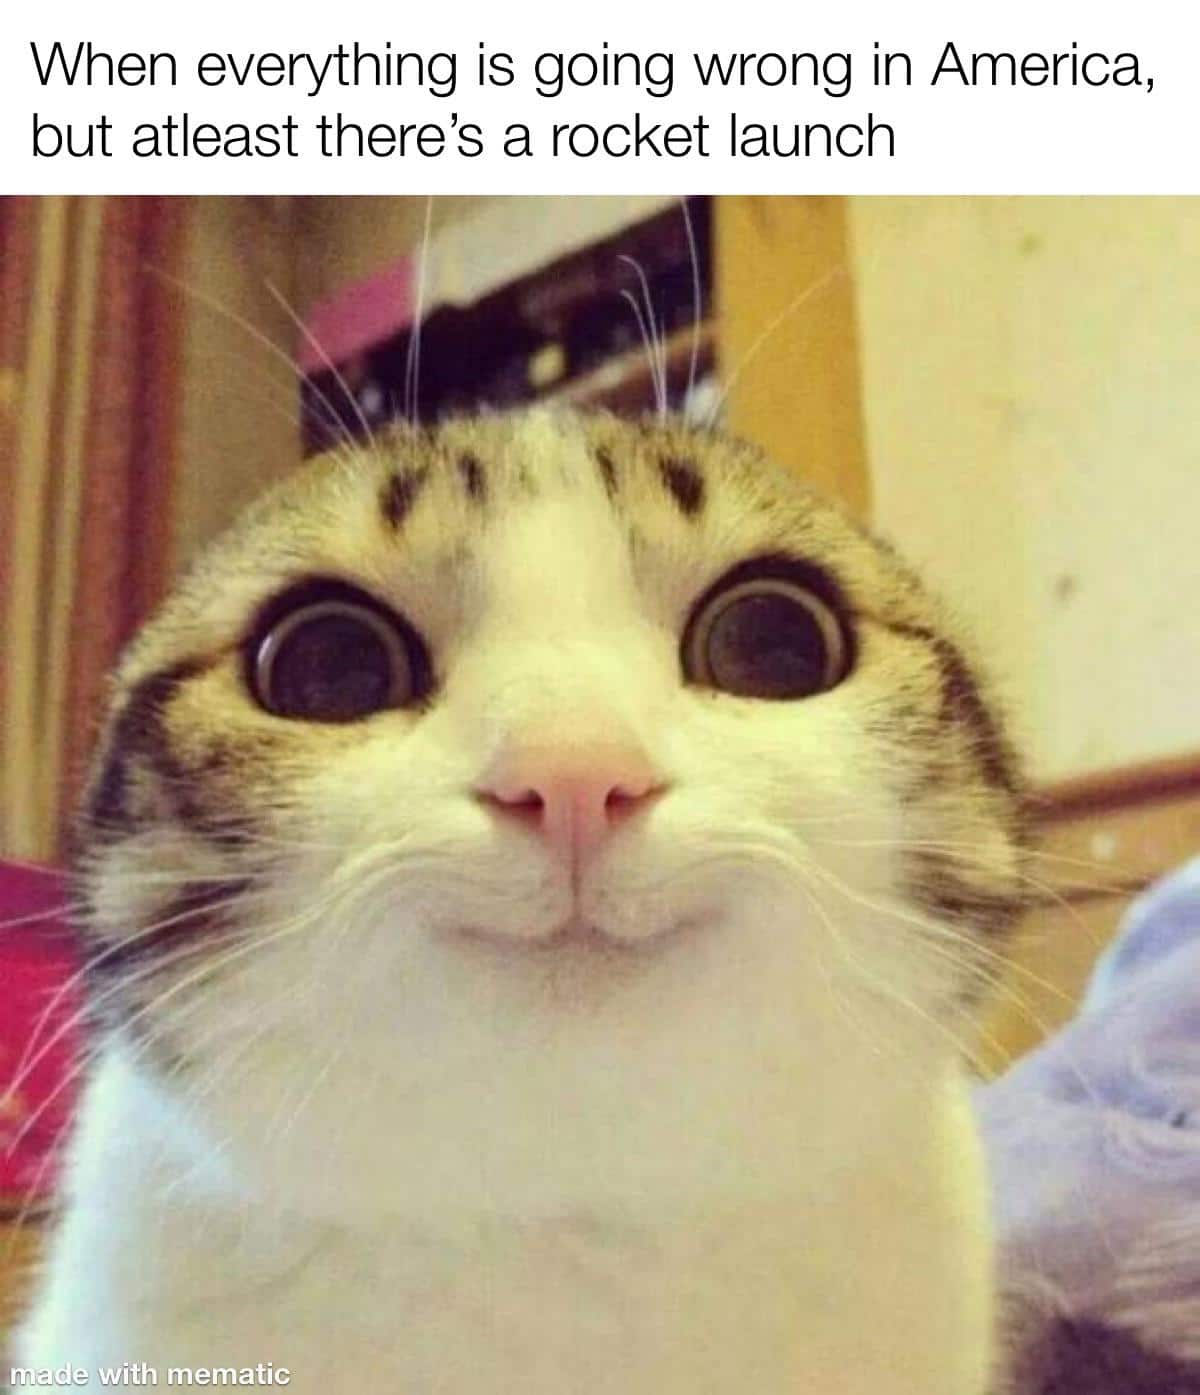 Funny, America, Americans, SpaceX, Minneapolis, United States other memes Funny, America, Americans, SpaceX, Minneapolis, United States text: When everything is going wrong in America, but atleast there's a rocket launch 'dé with mematic 